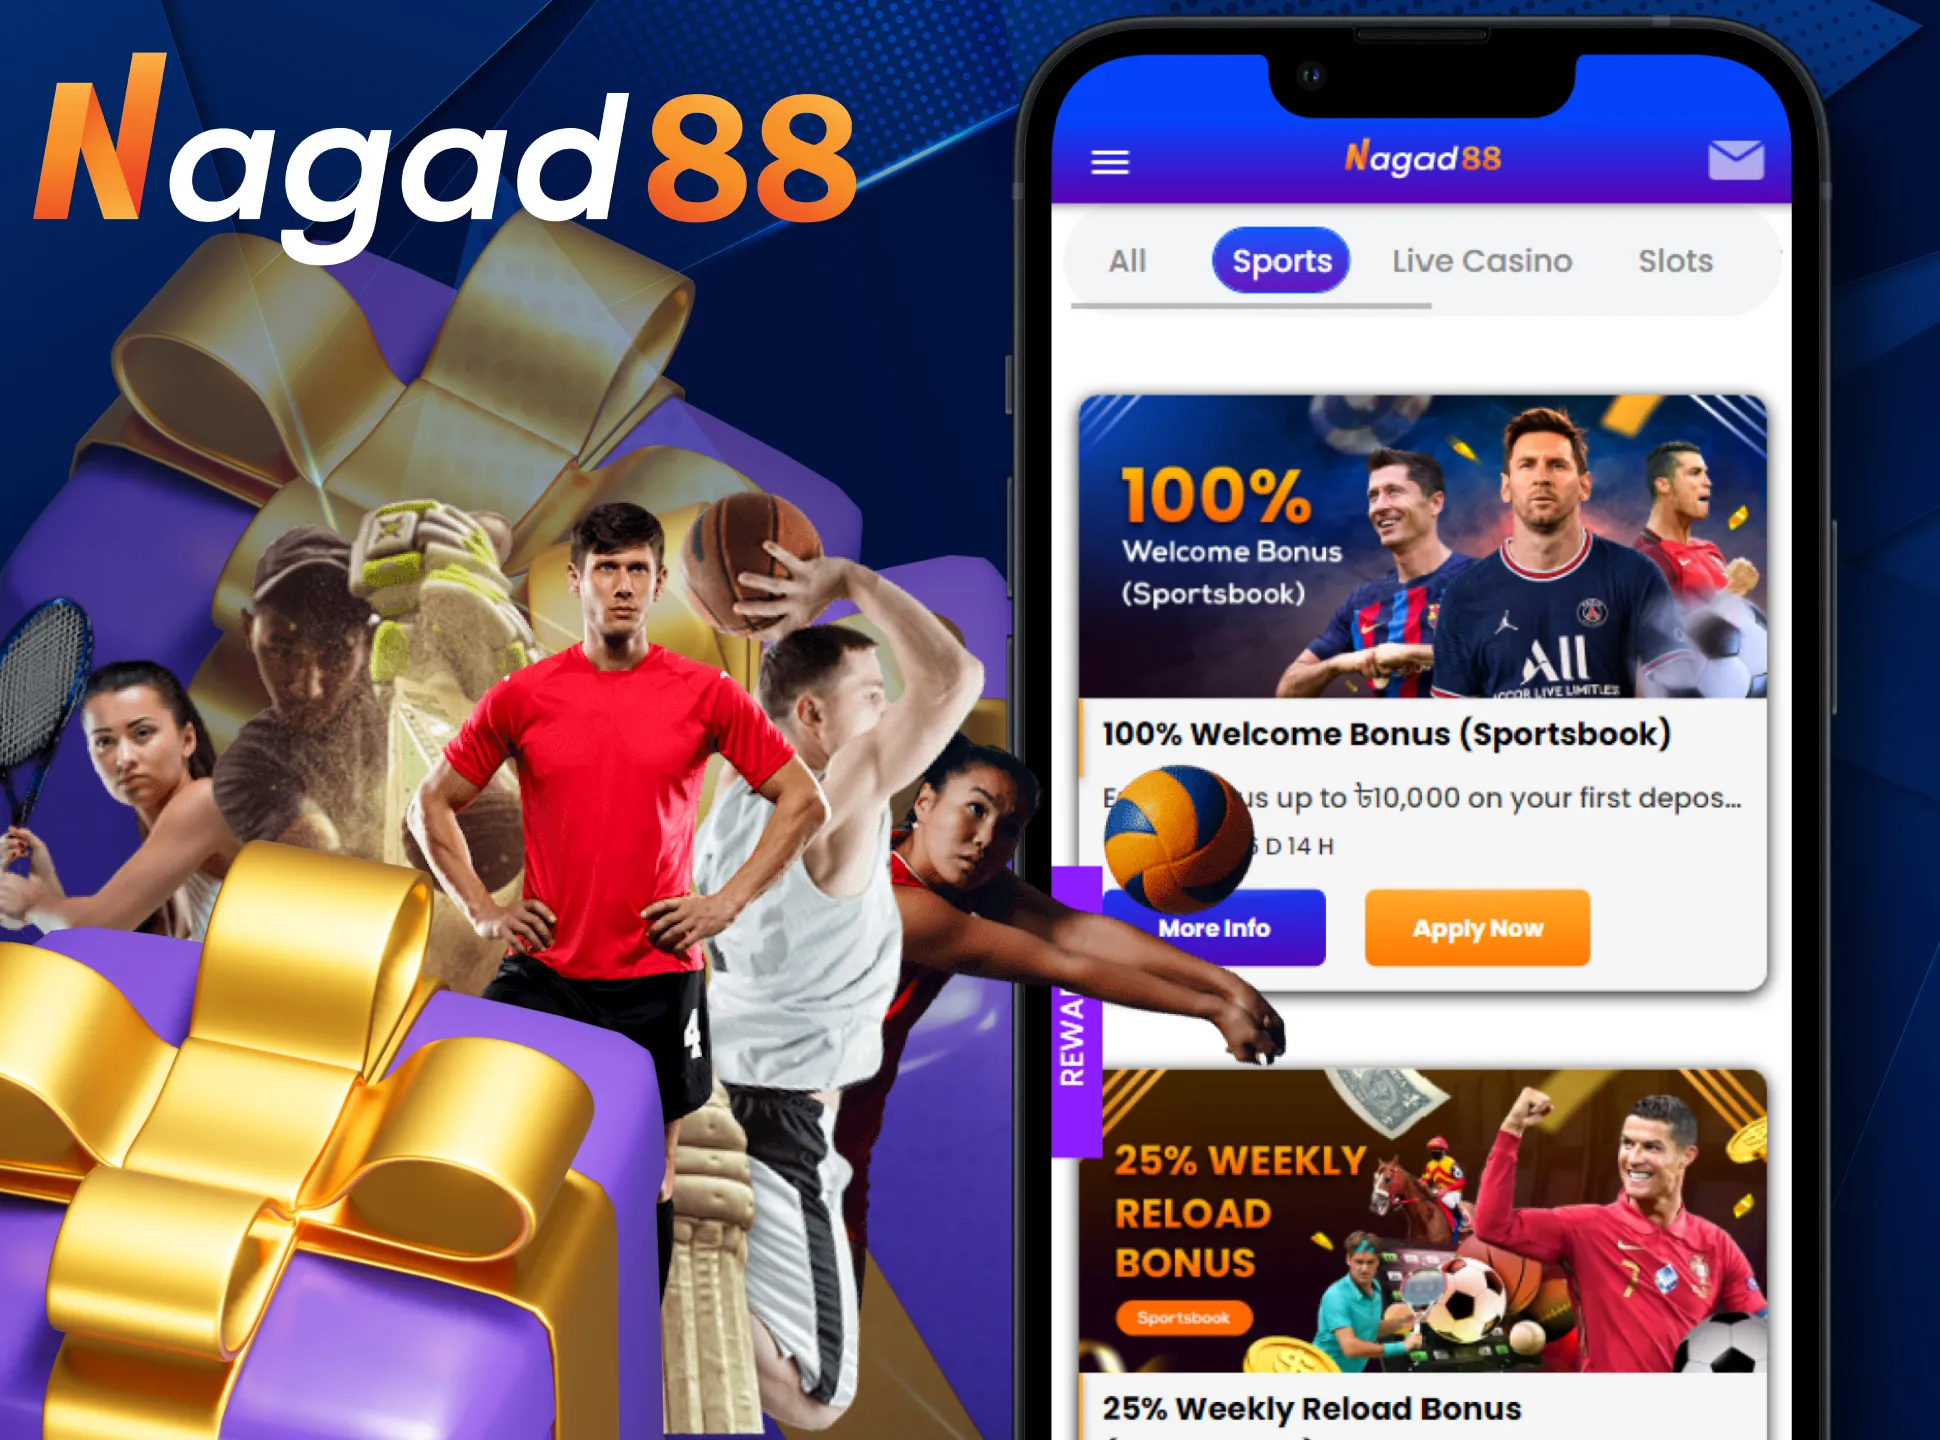 In the Nagad88 app, get a special bonus on sports betting.